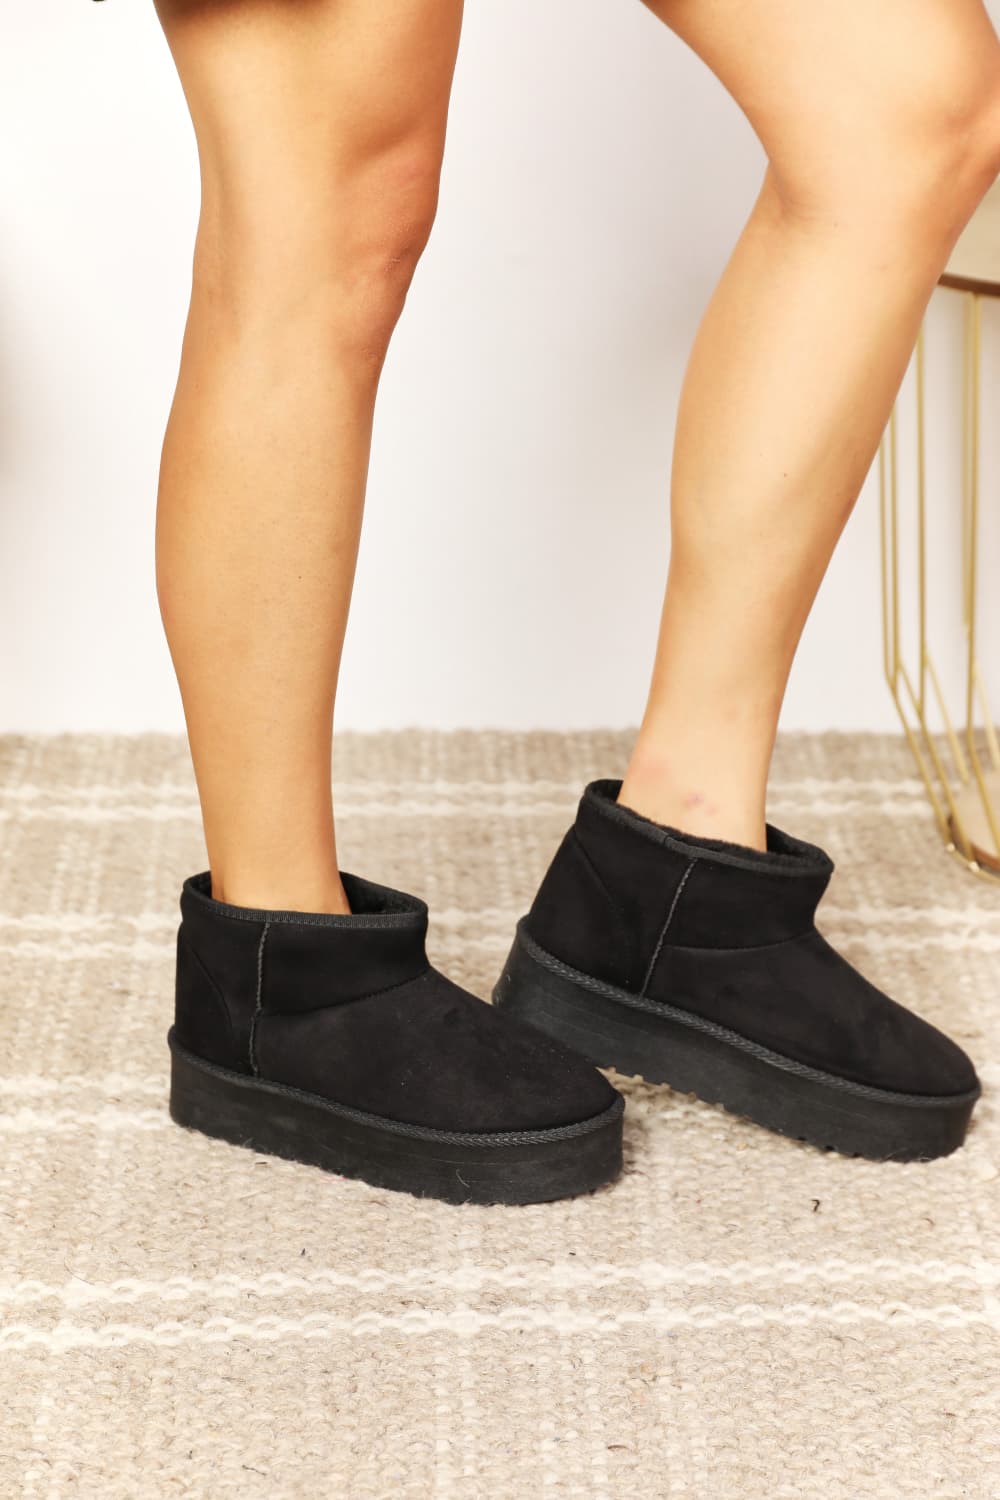 Legend Fleece Lined Platform Chunky Thick Sole Mini Ankle Black Bootie Boots